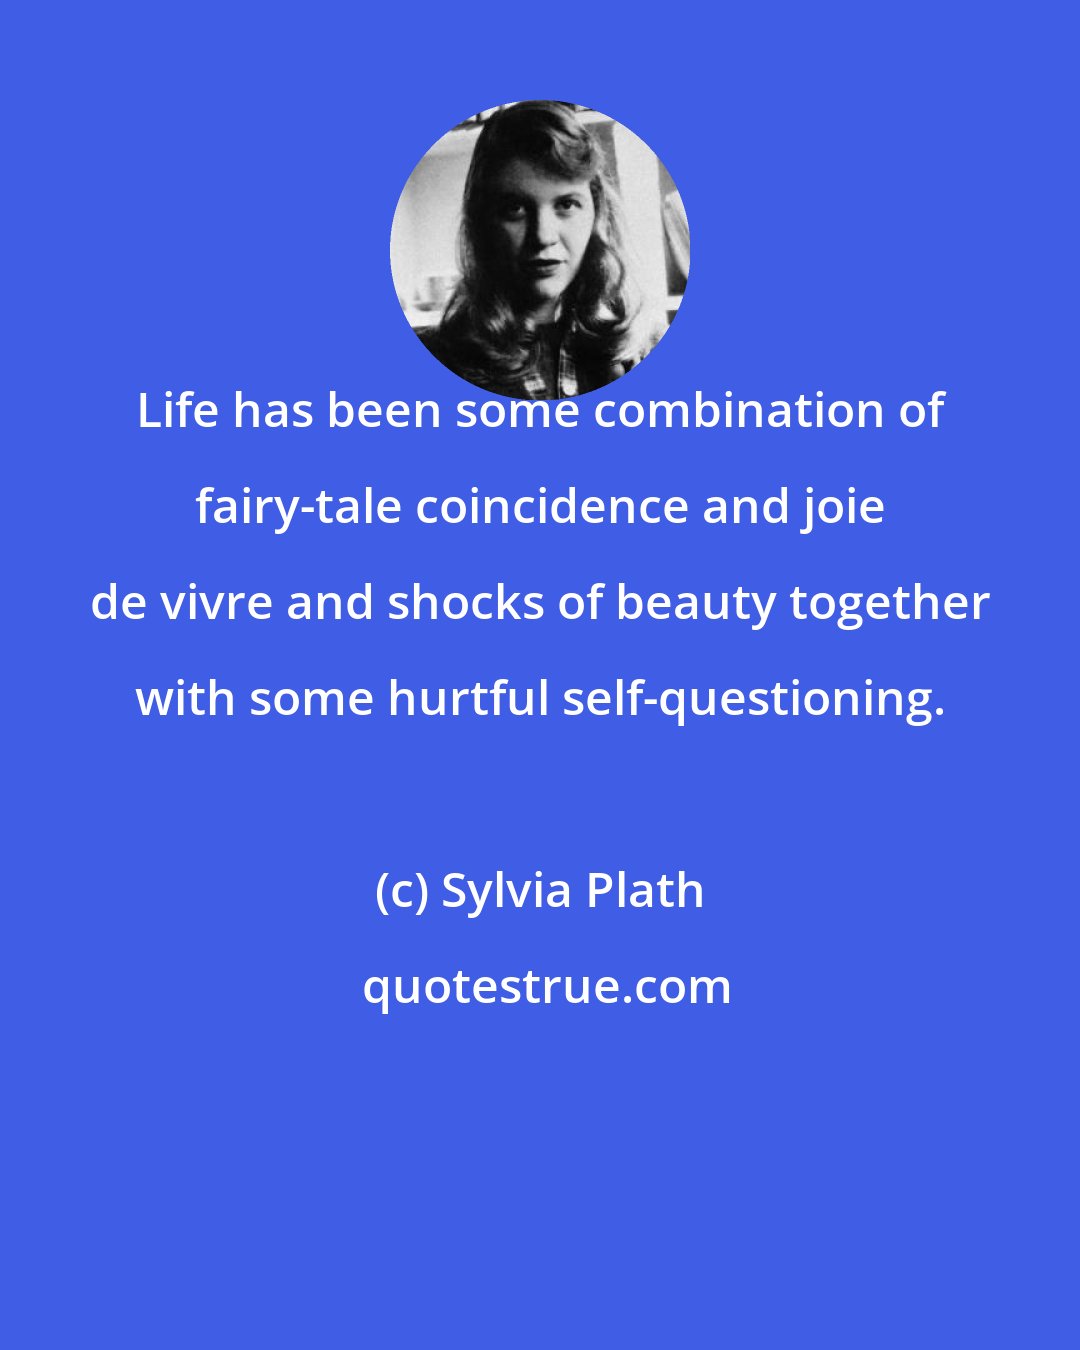 Sylvia Plath: Life has been some combination of fairy-tale coincidence and joie de vivre and shocks of beauty together with some hurtful self-questioning.